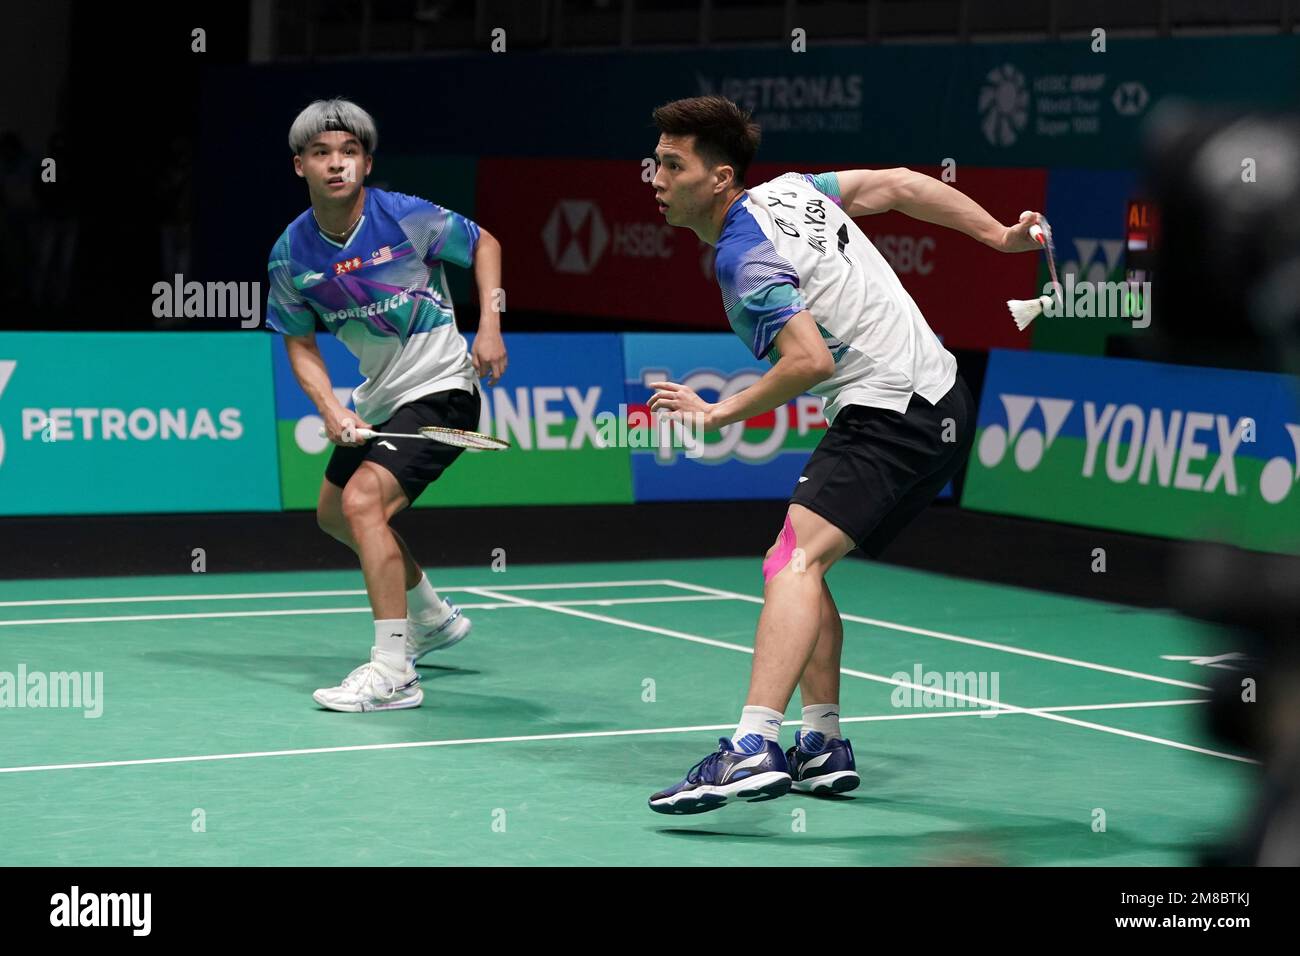 Malaysias Ong Yew Sin, right and Teo Ee Yi plays a shot against Indonesias Fajar Alfian and Muhammad Rian Ardianto during their mens doubles quarterfinals match at the Malaysia Open badminton tournament